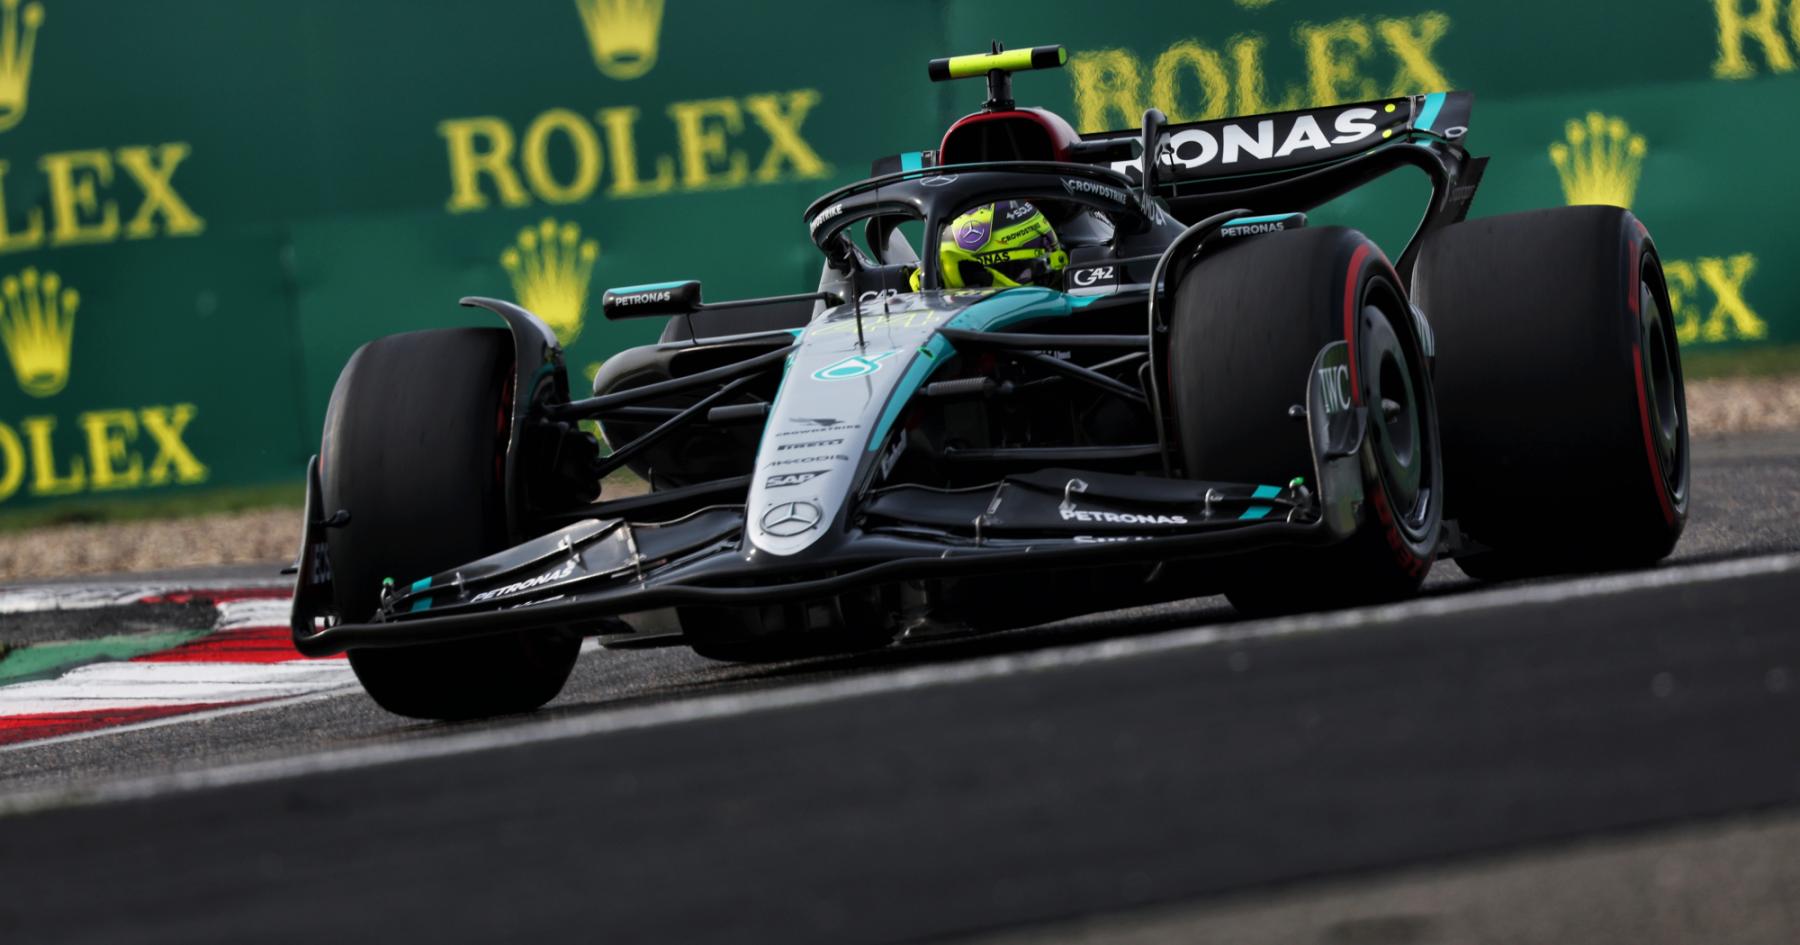 Mercedes Harnesses Power: Navigating the Double-Edged Sword of a New Rule